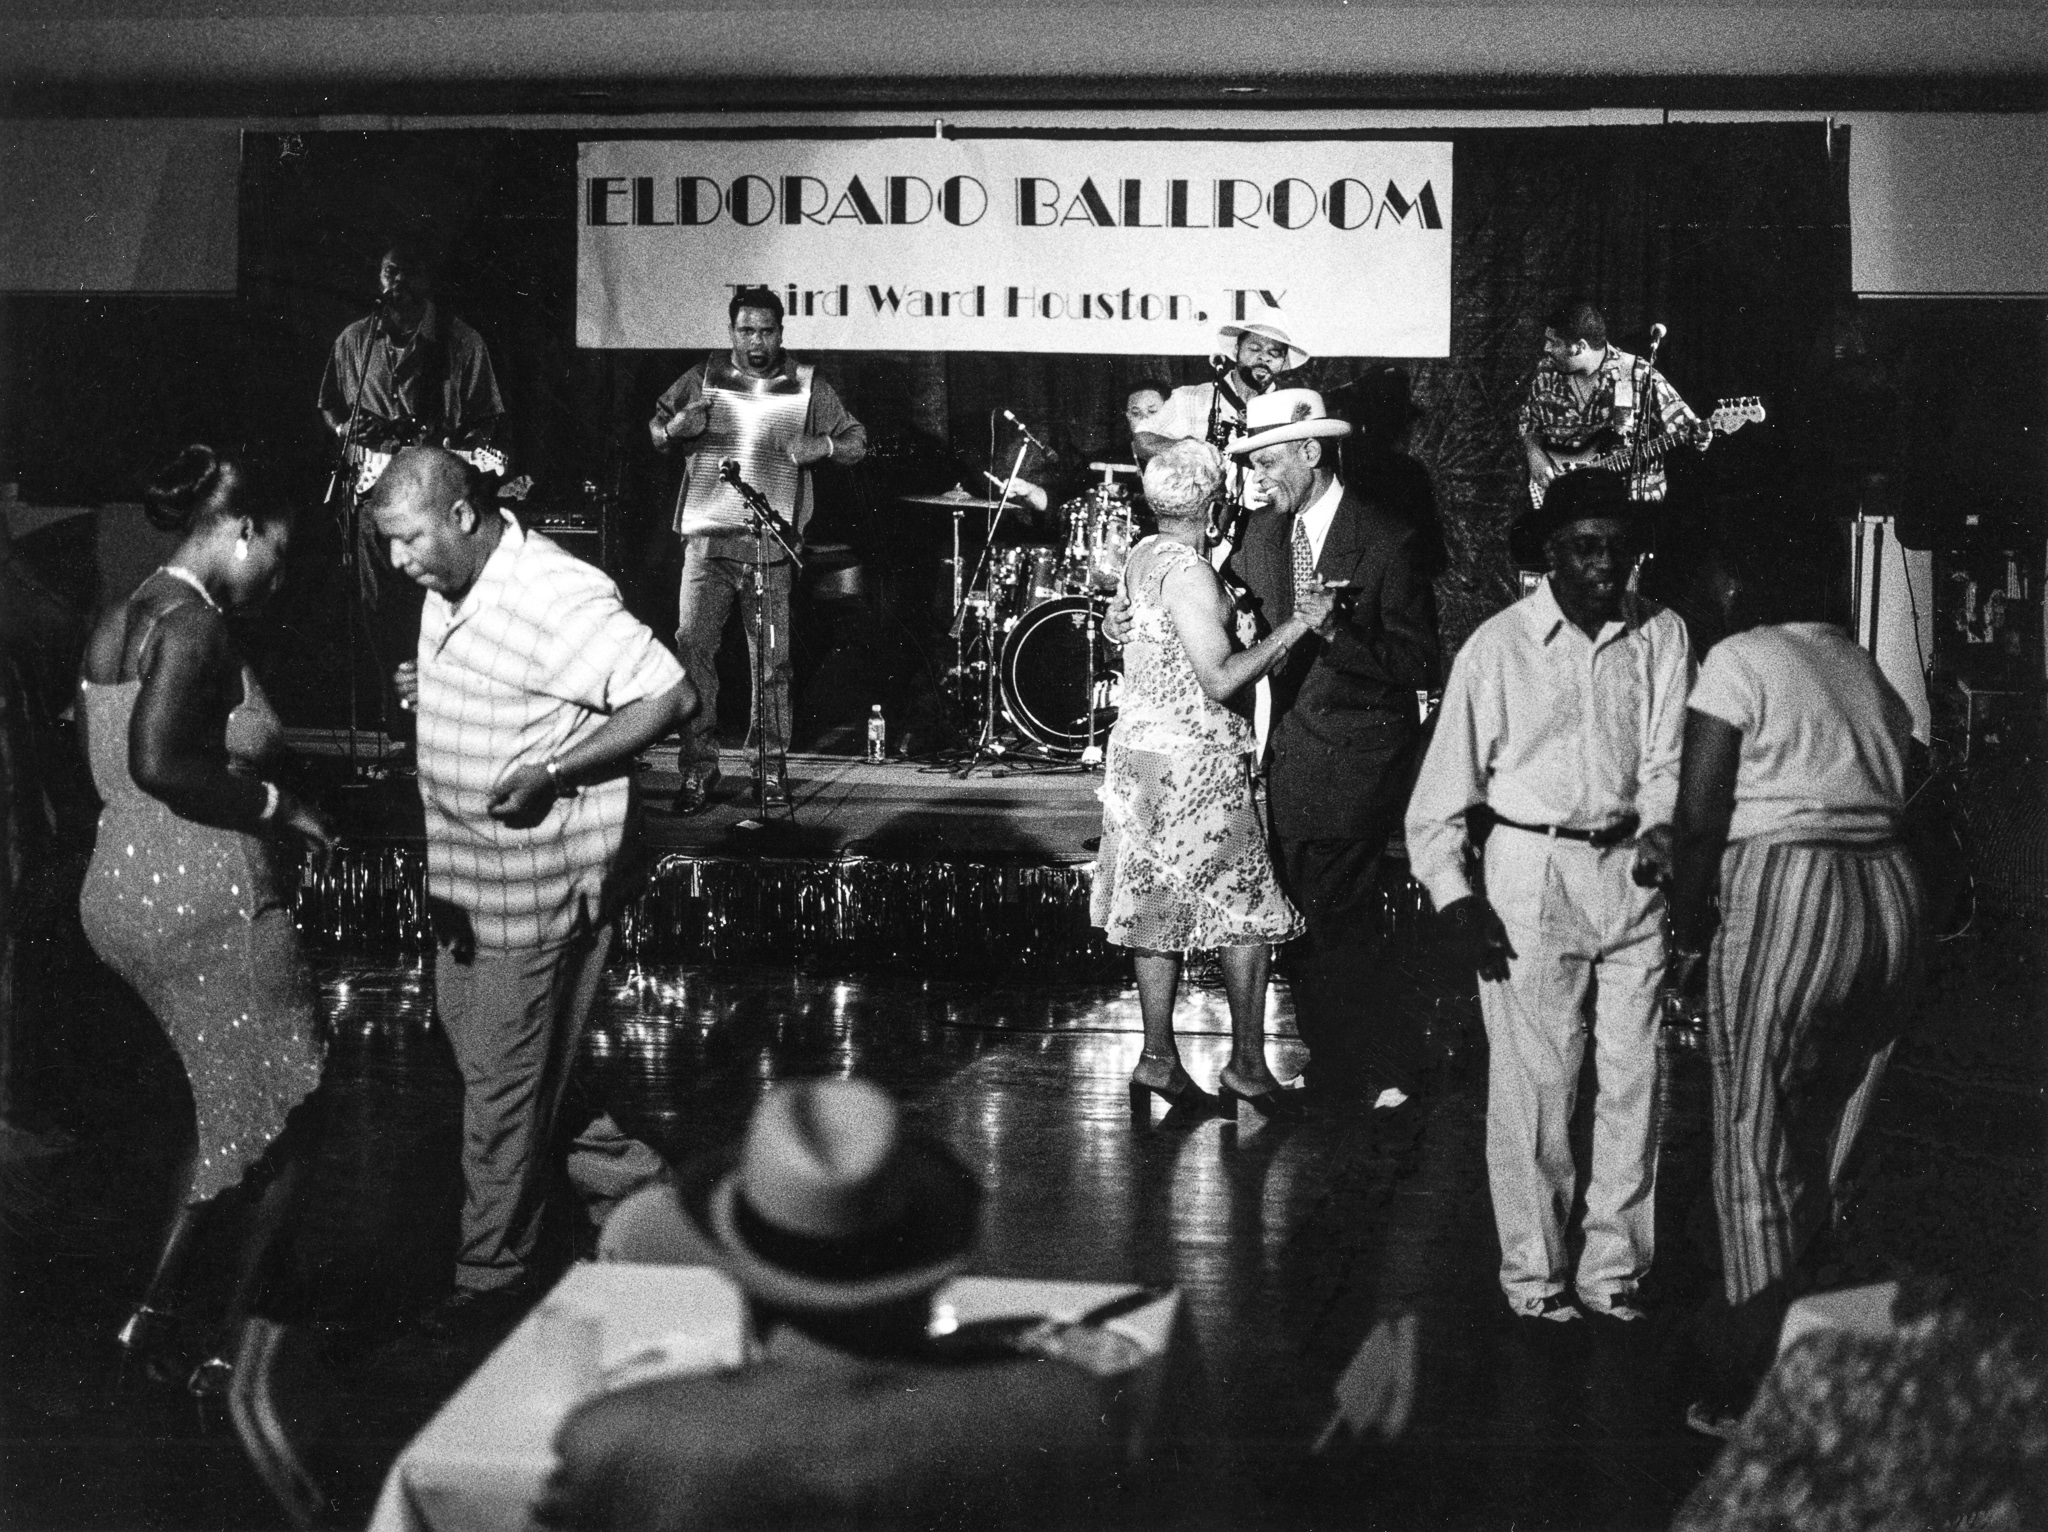 Juneteenth Dance (with Step Rideau and the Zydeco Outlaws), Eldorado Ballroom, Houston, Texas, 2003. (Photograph by James Fraher, from the books "Texas Zydeco" and "Down in Houston: Bayou City Blues" by Roger Wood, University of Texas Press)